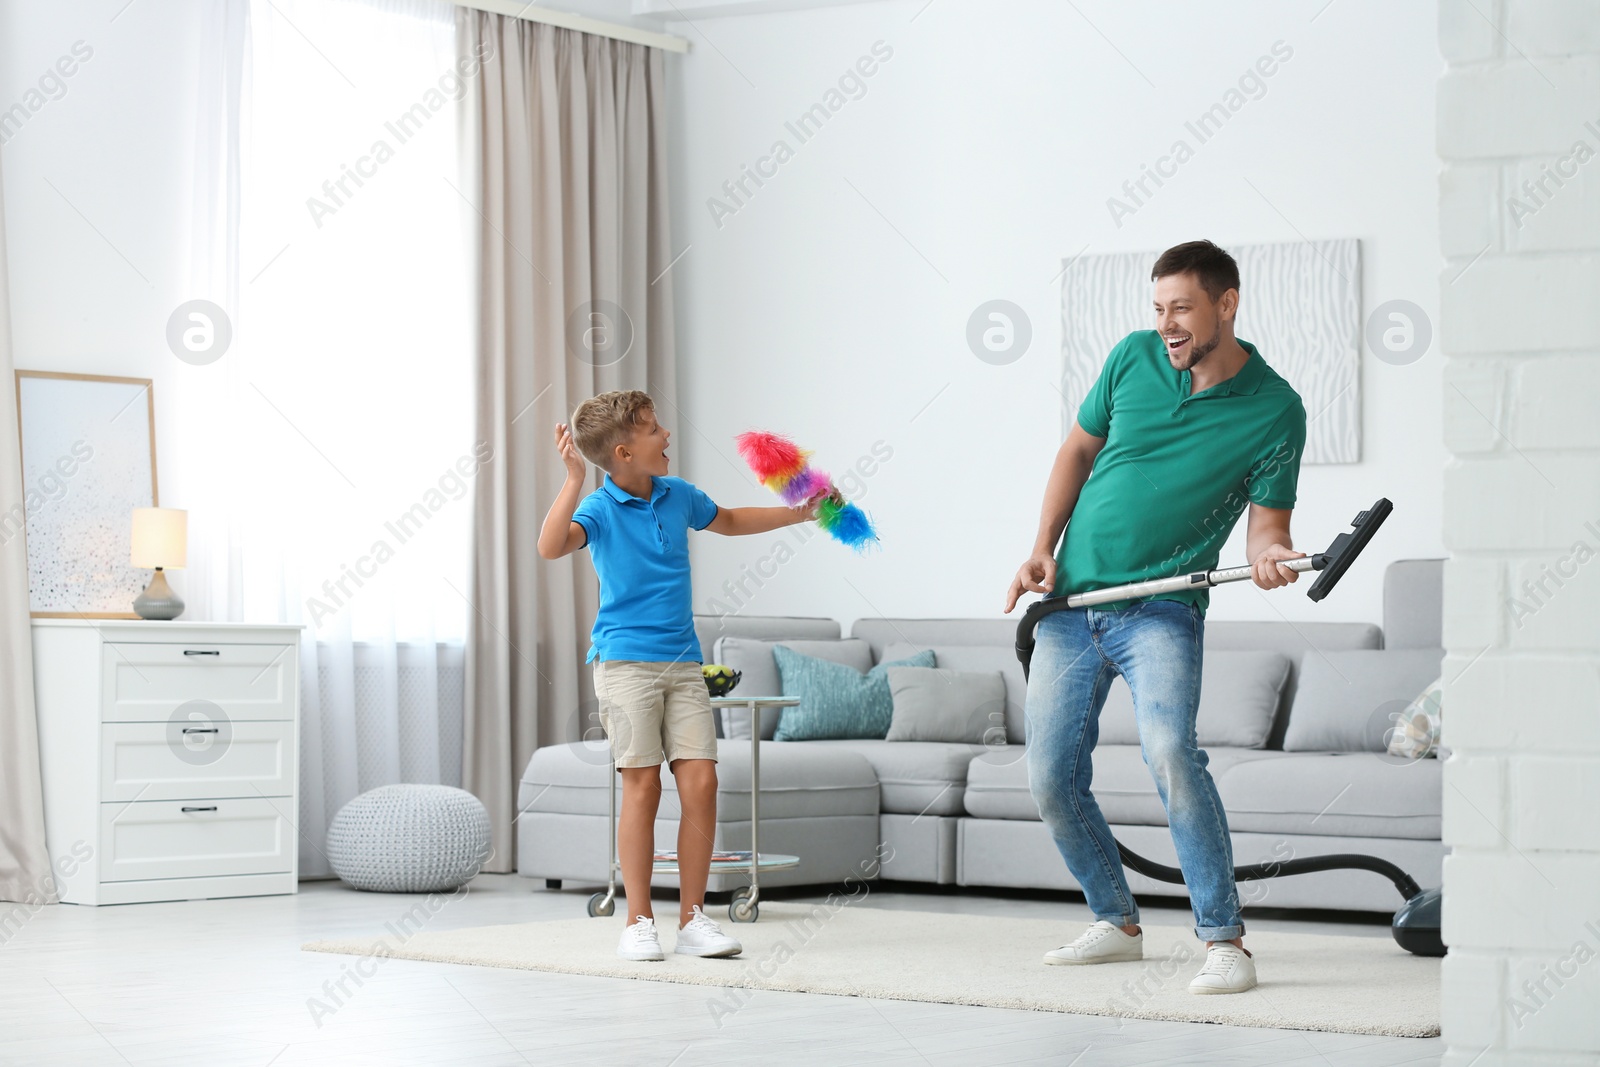 Photo of Dad and son having fun while cleaning living room together